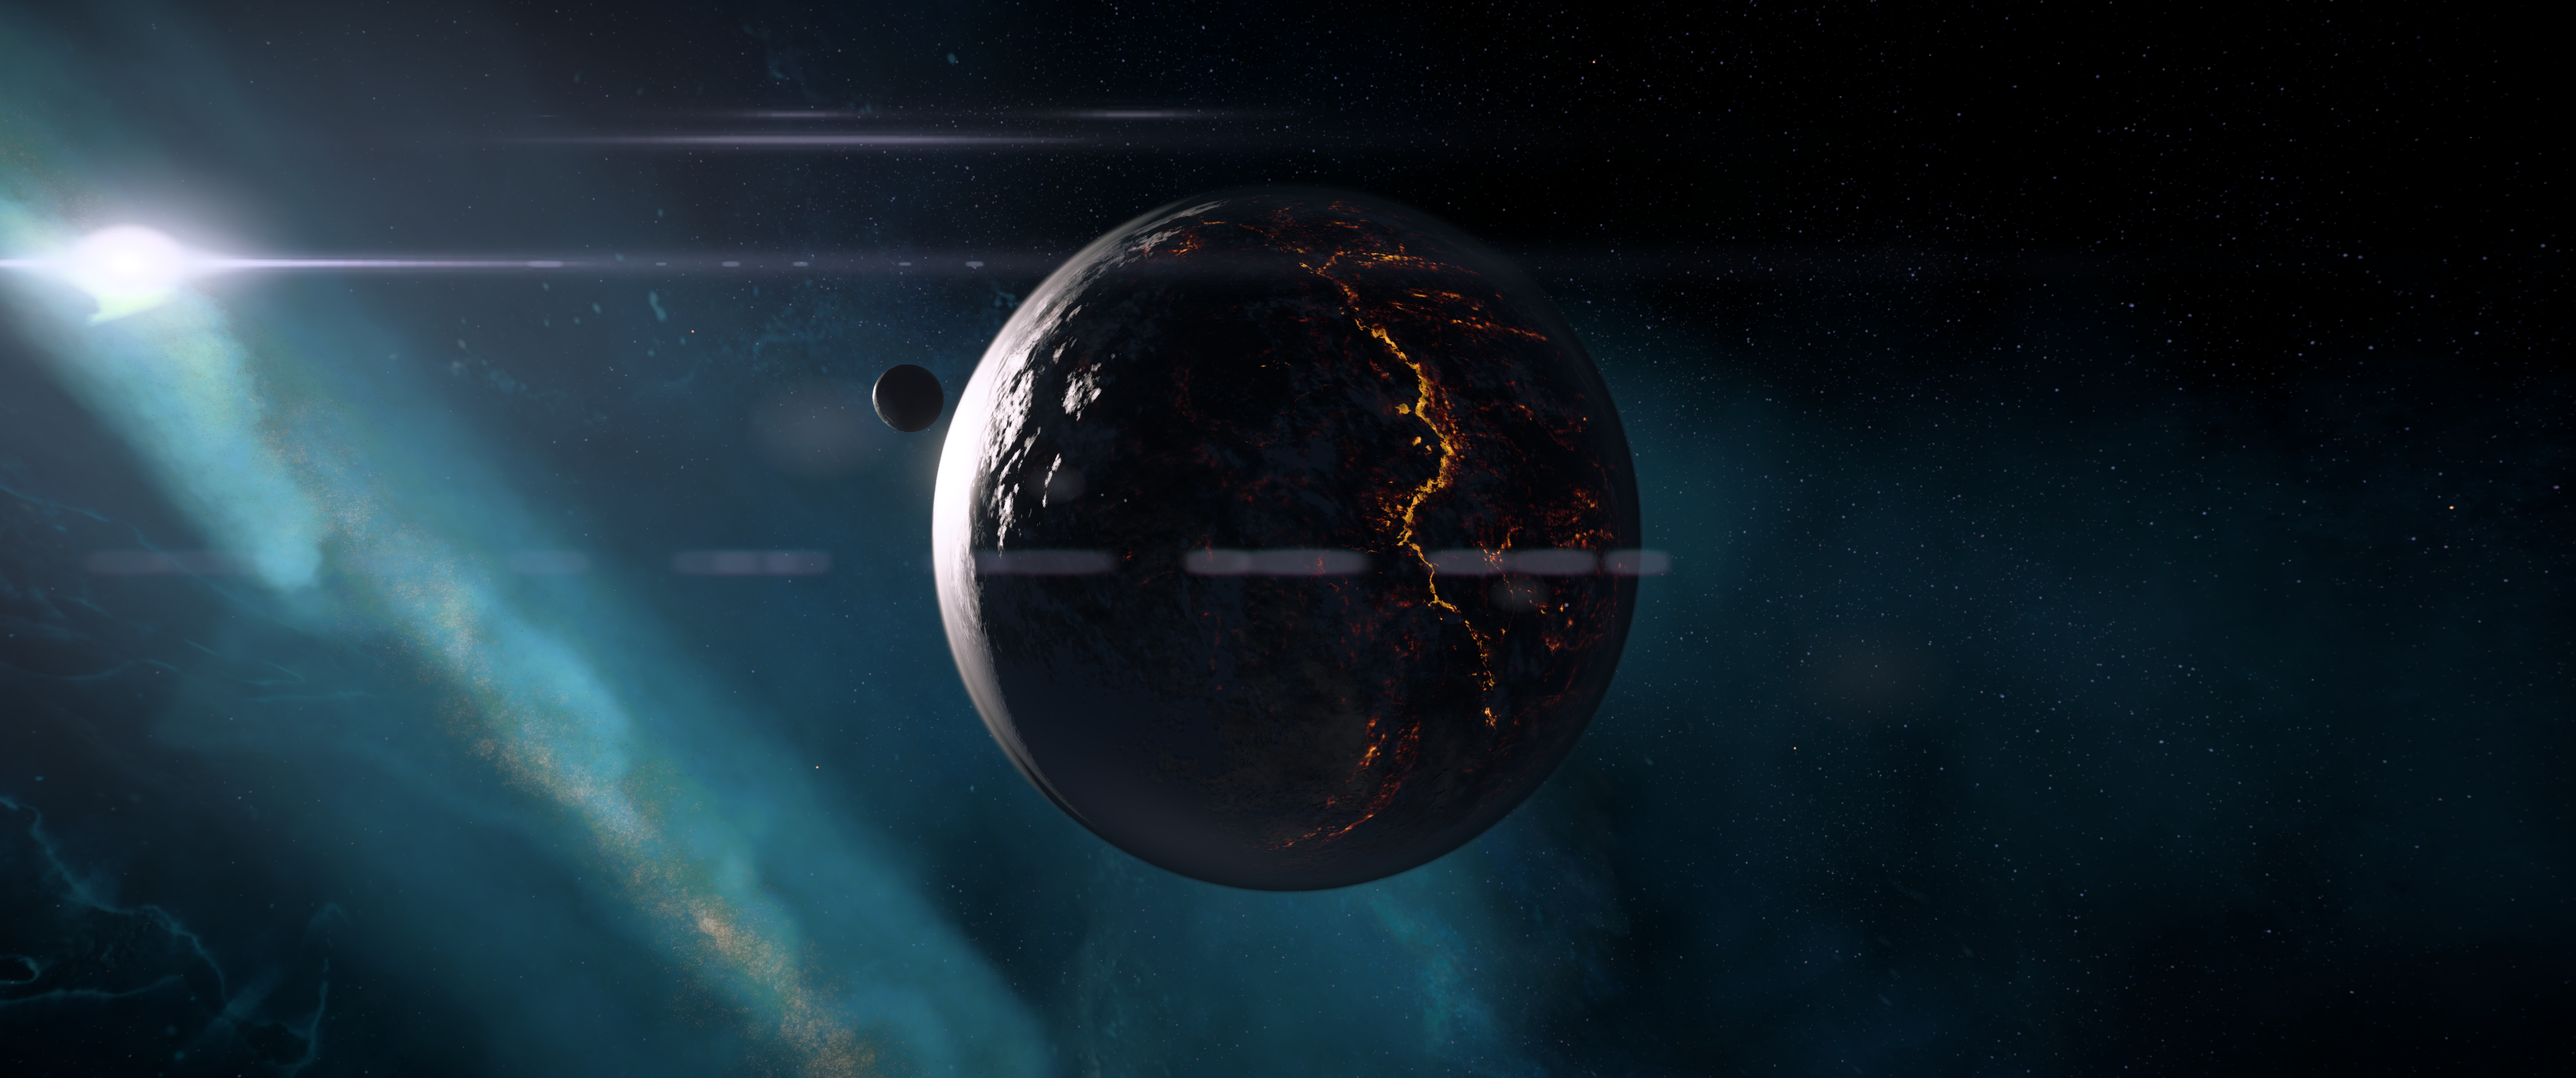 General 3440x1440 Mass Effect space planet Mass Effect: Andromeda video games PC gaming science fiction